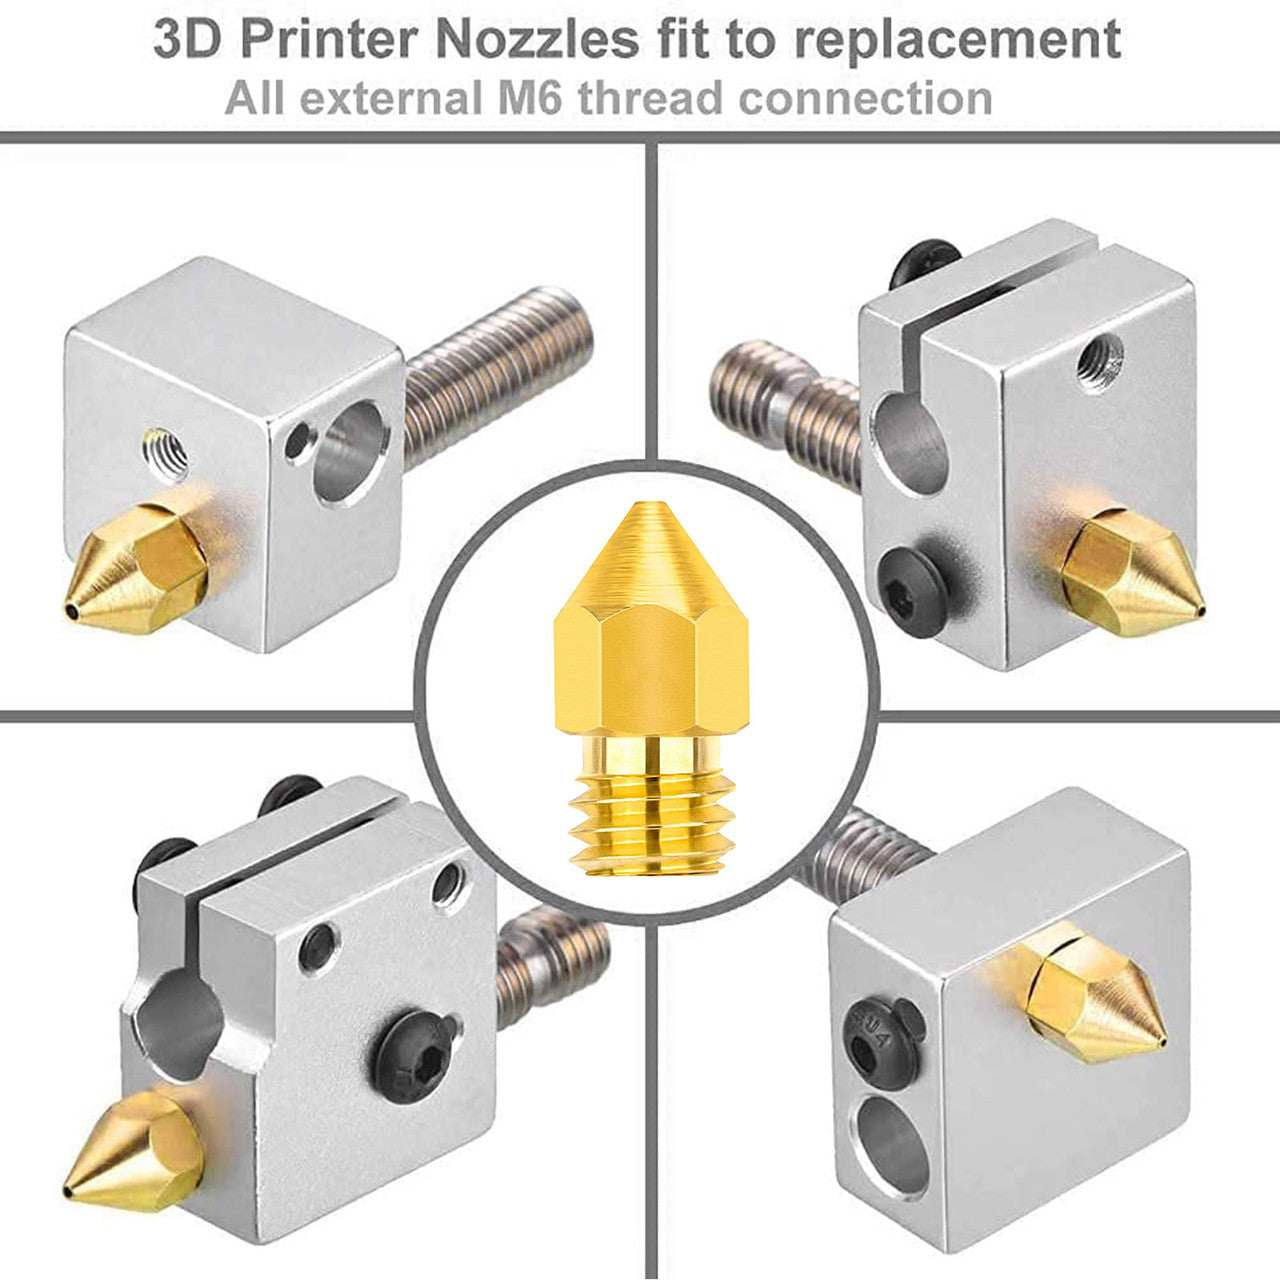 MK8 Extruder 3D Printer Nozzle Kit 0.2-1.0mm, Durable and Built to Last